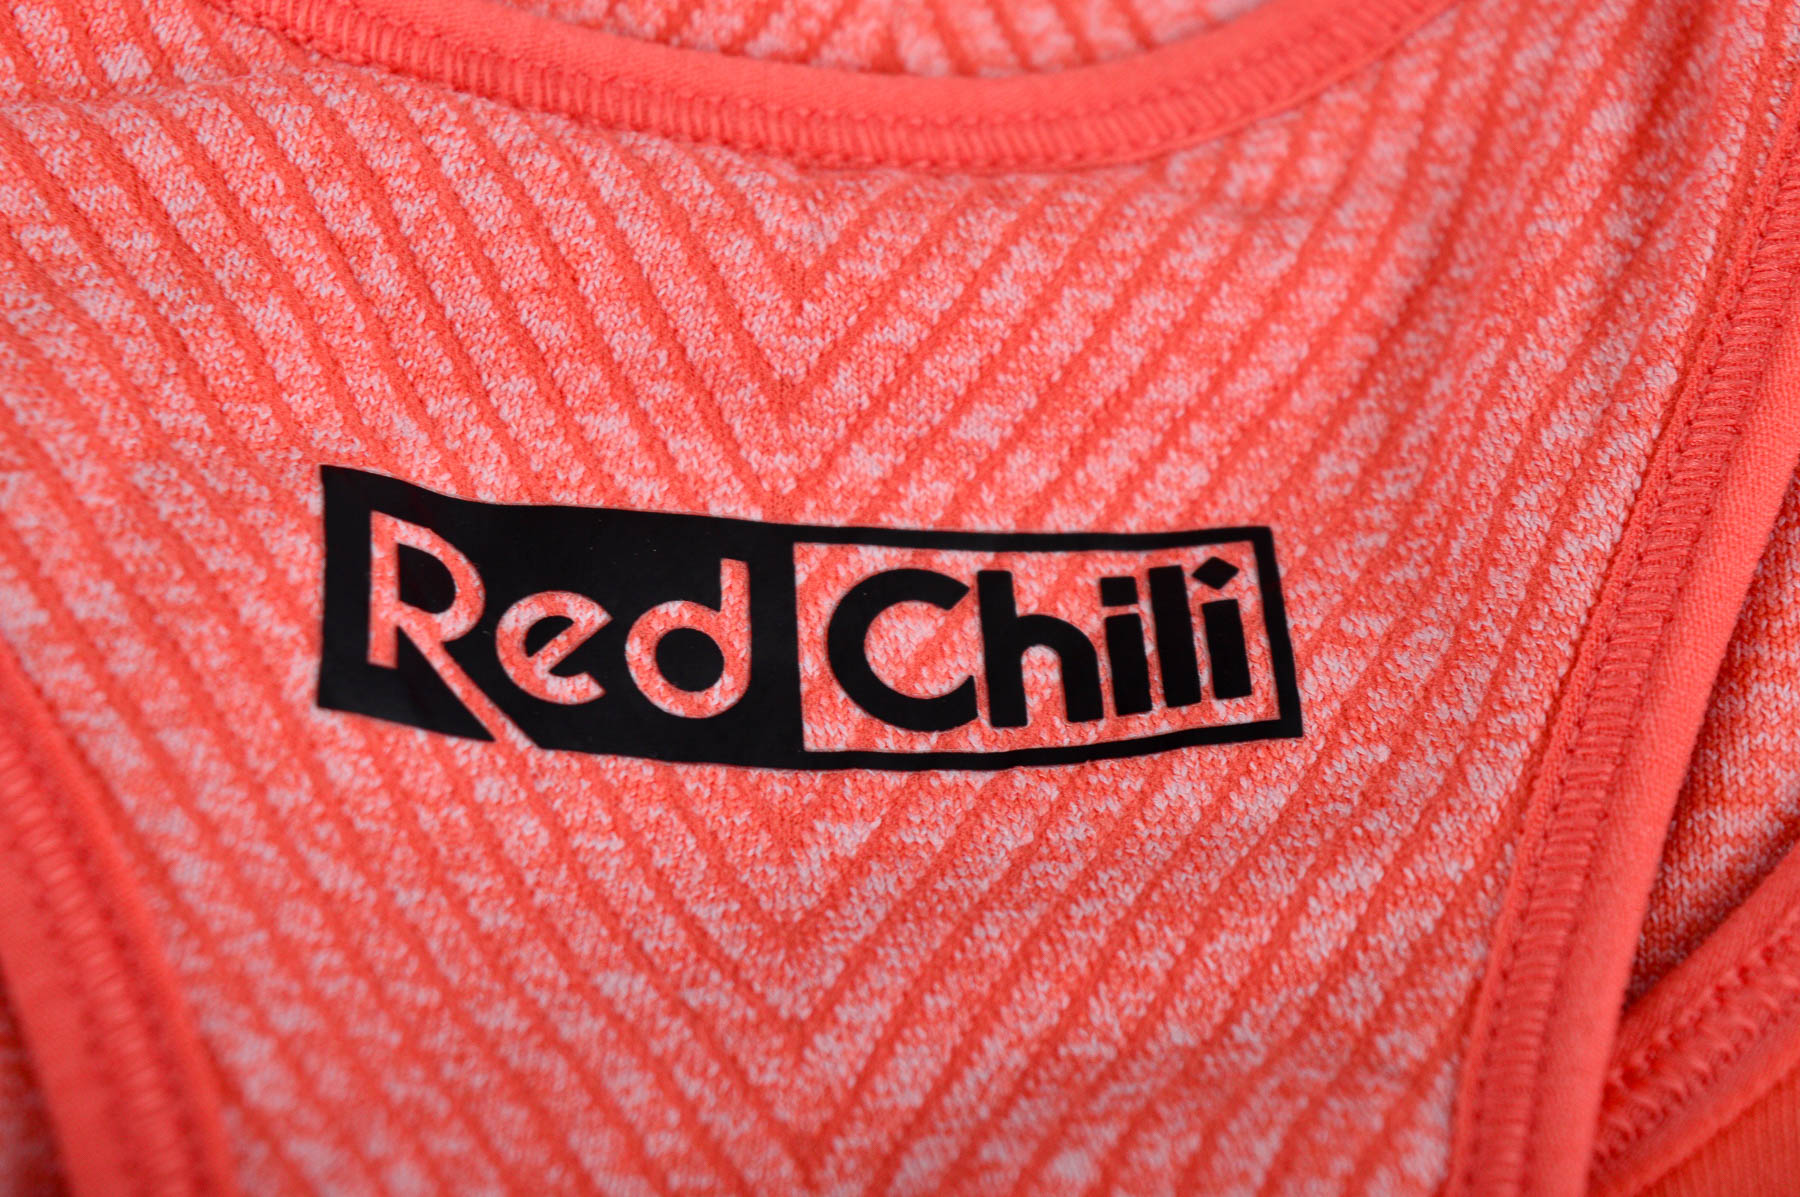 Women's top - Red Chilli - 2